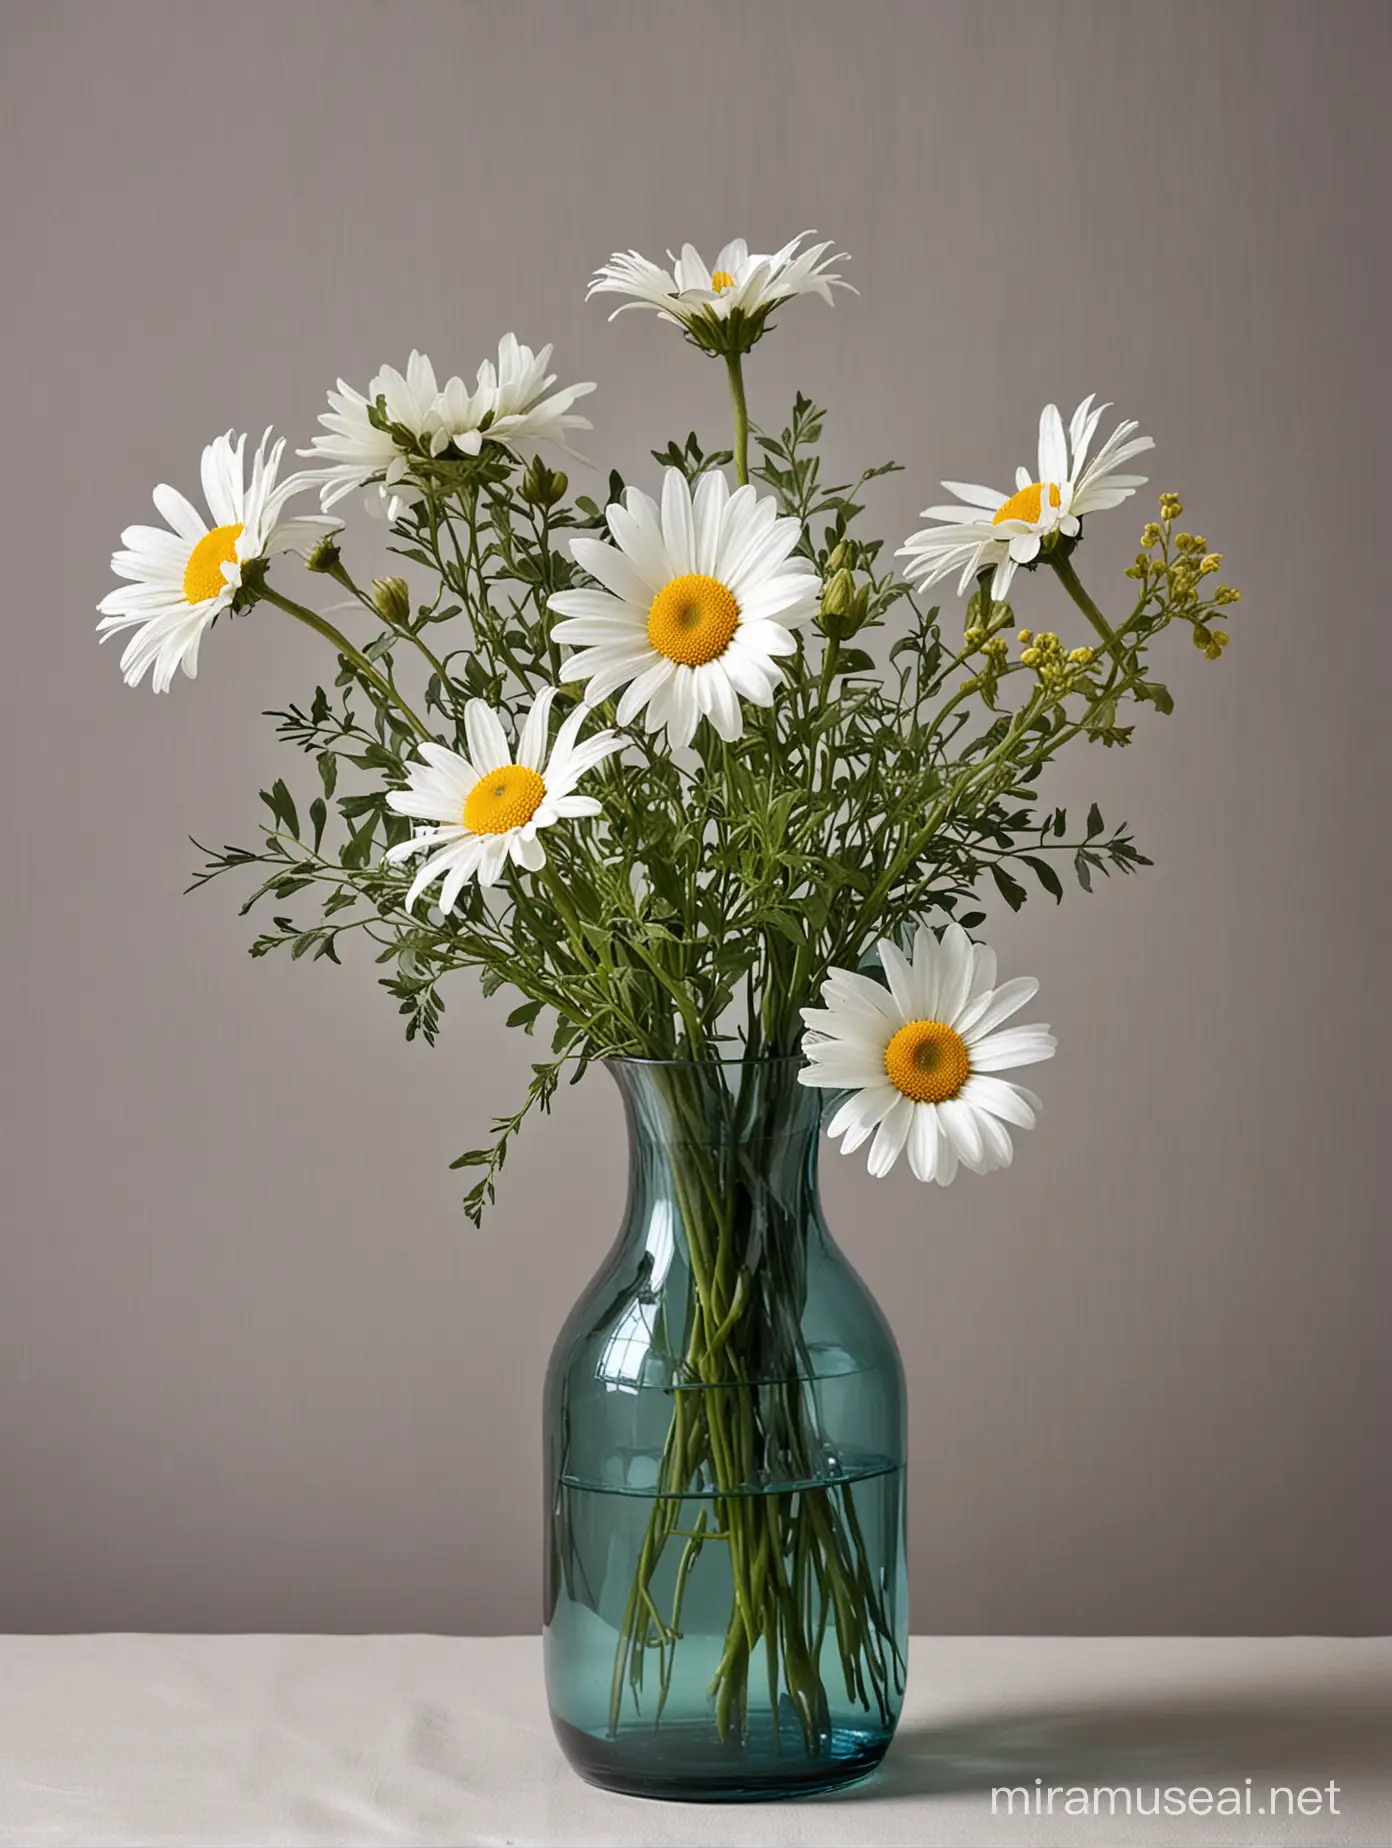 natural-big-1-daisy-MULTI COLORS-wild-flower-botanical-in-stylish-decorative-bluish-green-glass vase-with-drapery